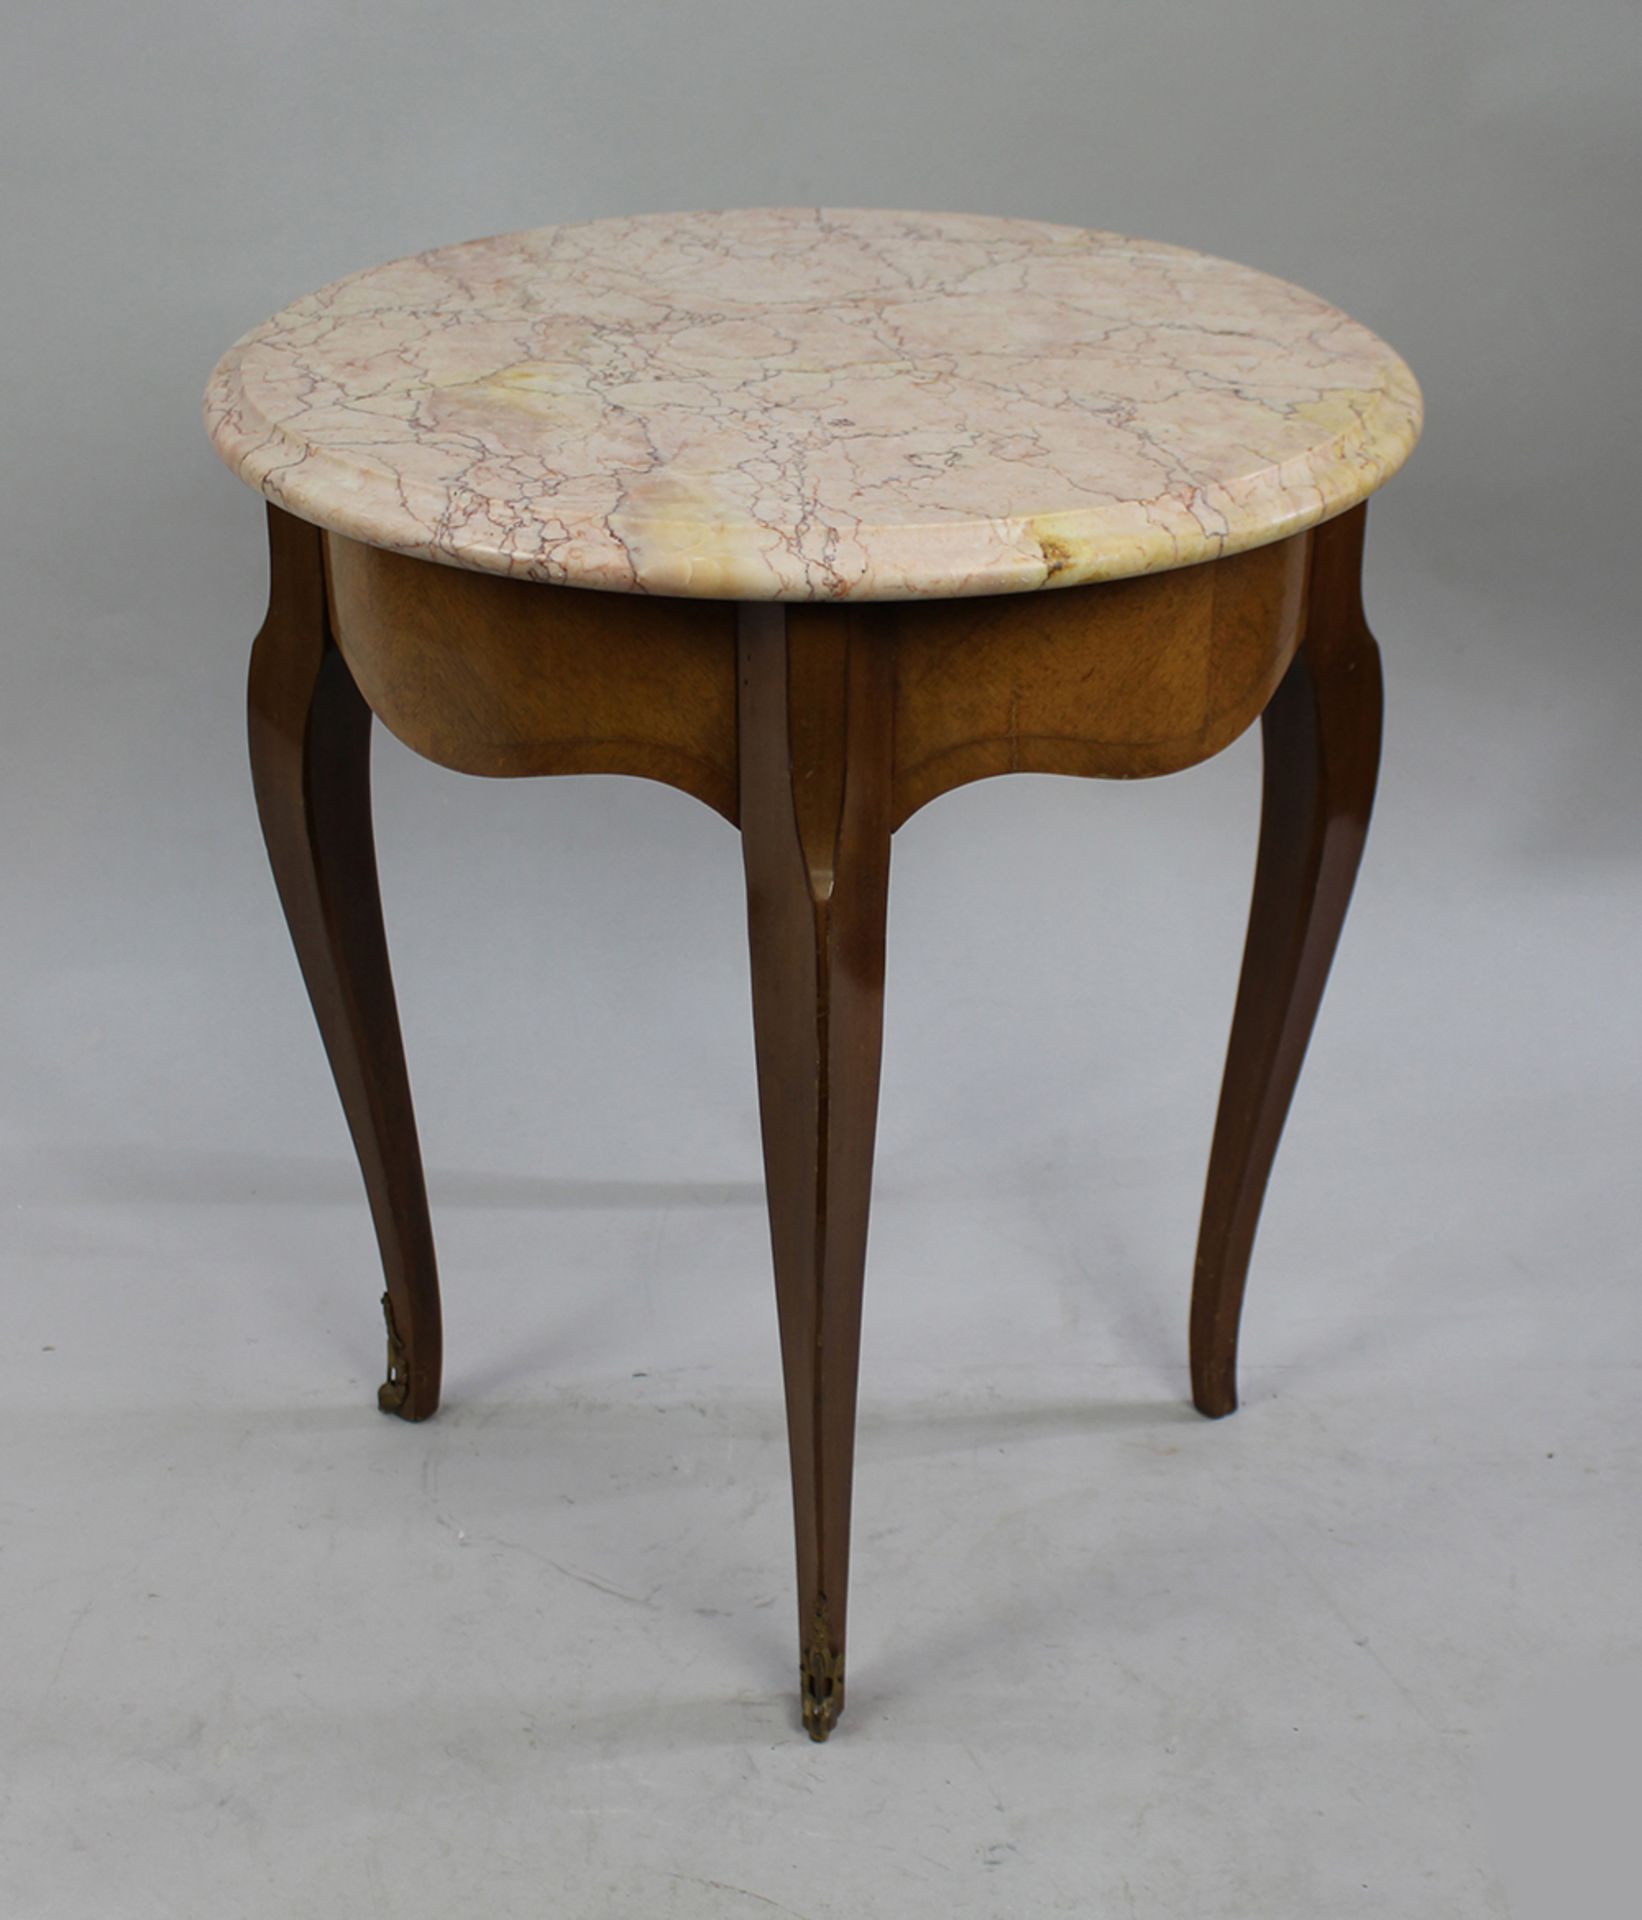 Circular Pink Marble Topped Satinwood Table - Image 5 of 6